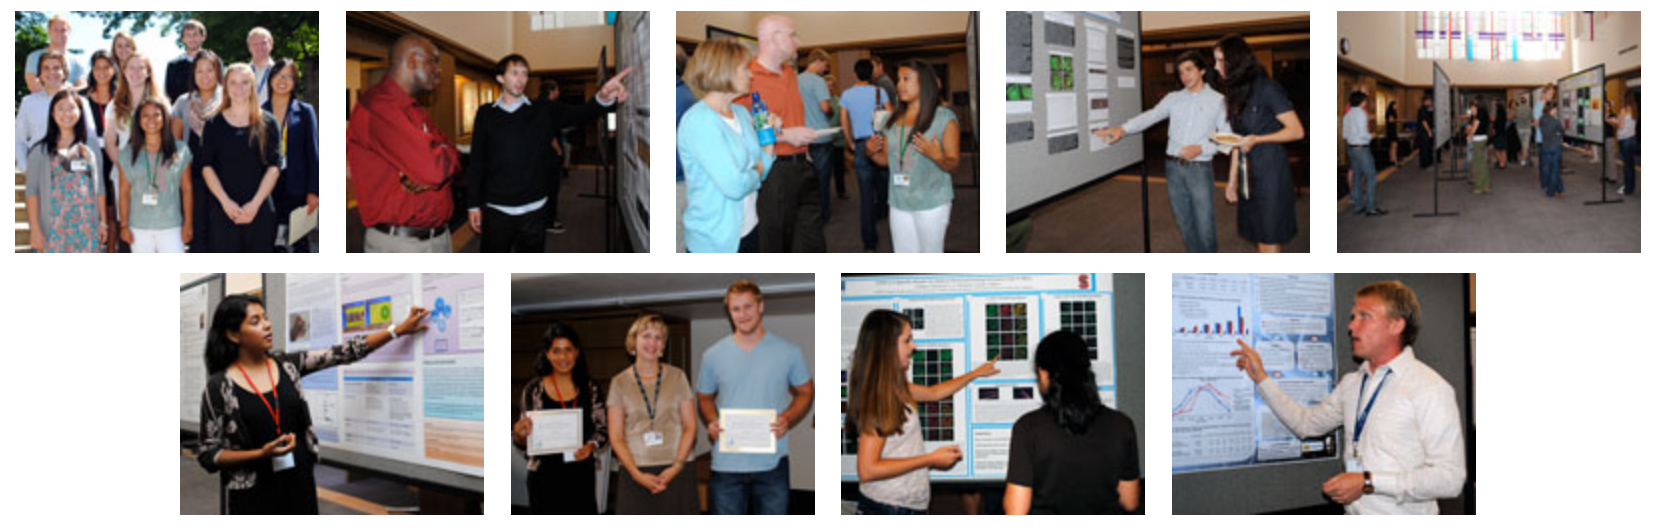 The 2011 summer interns spend the summer doing research under the direction of their faculty mentor and created a poster about their research. At the summer intern poster session, they give a synopsis of their research to the Institute's faculty and staff as well as their families.